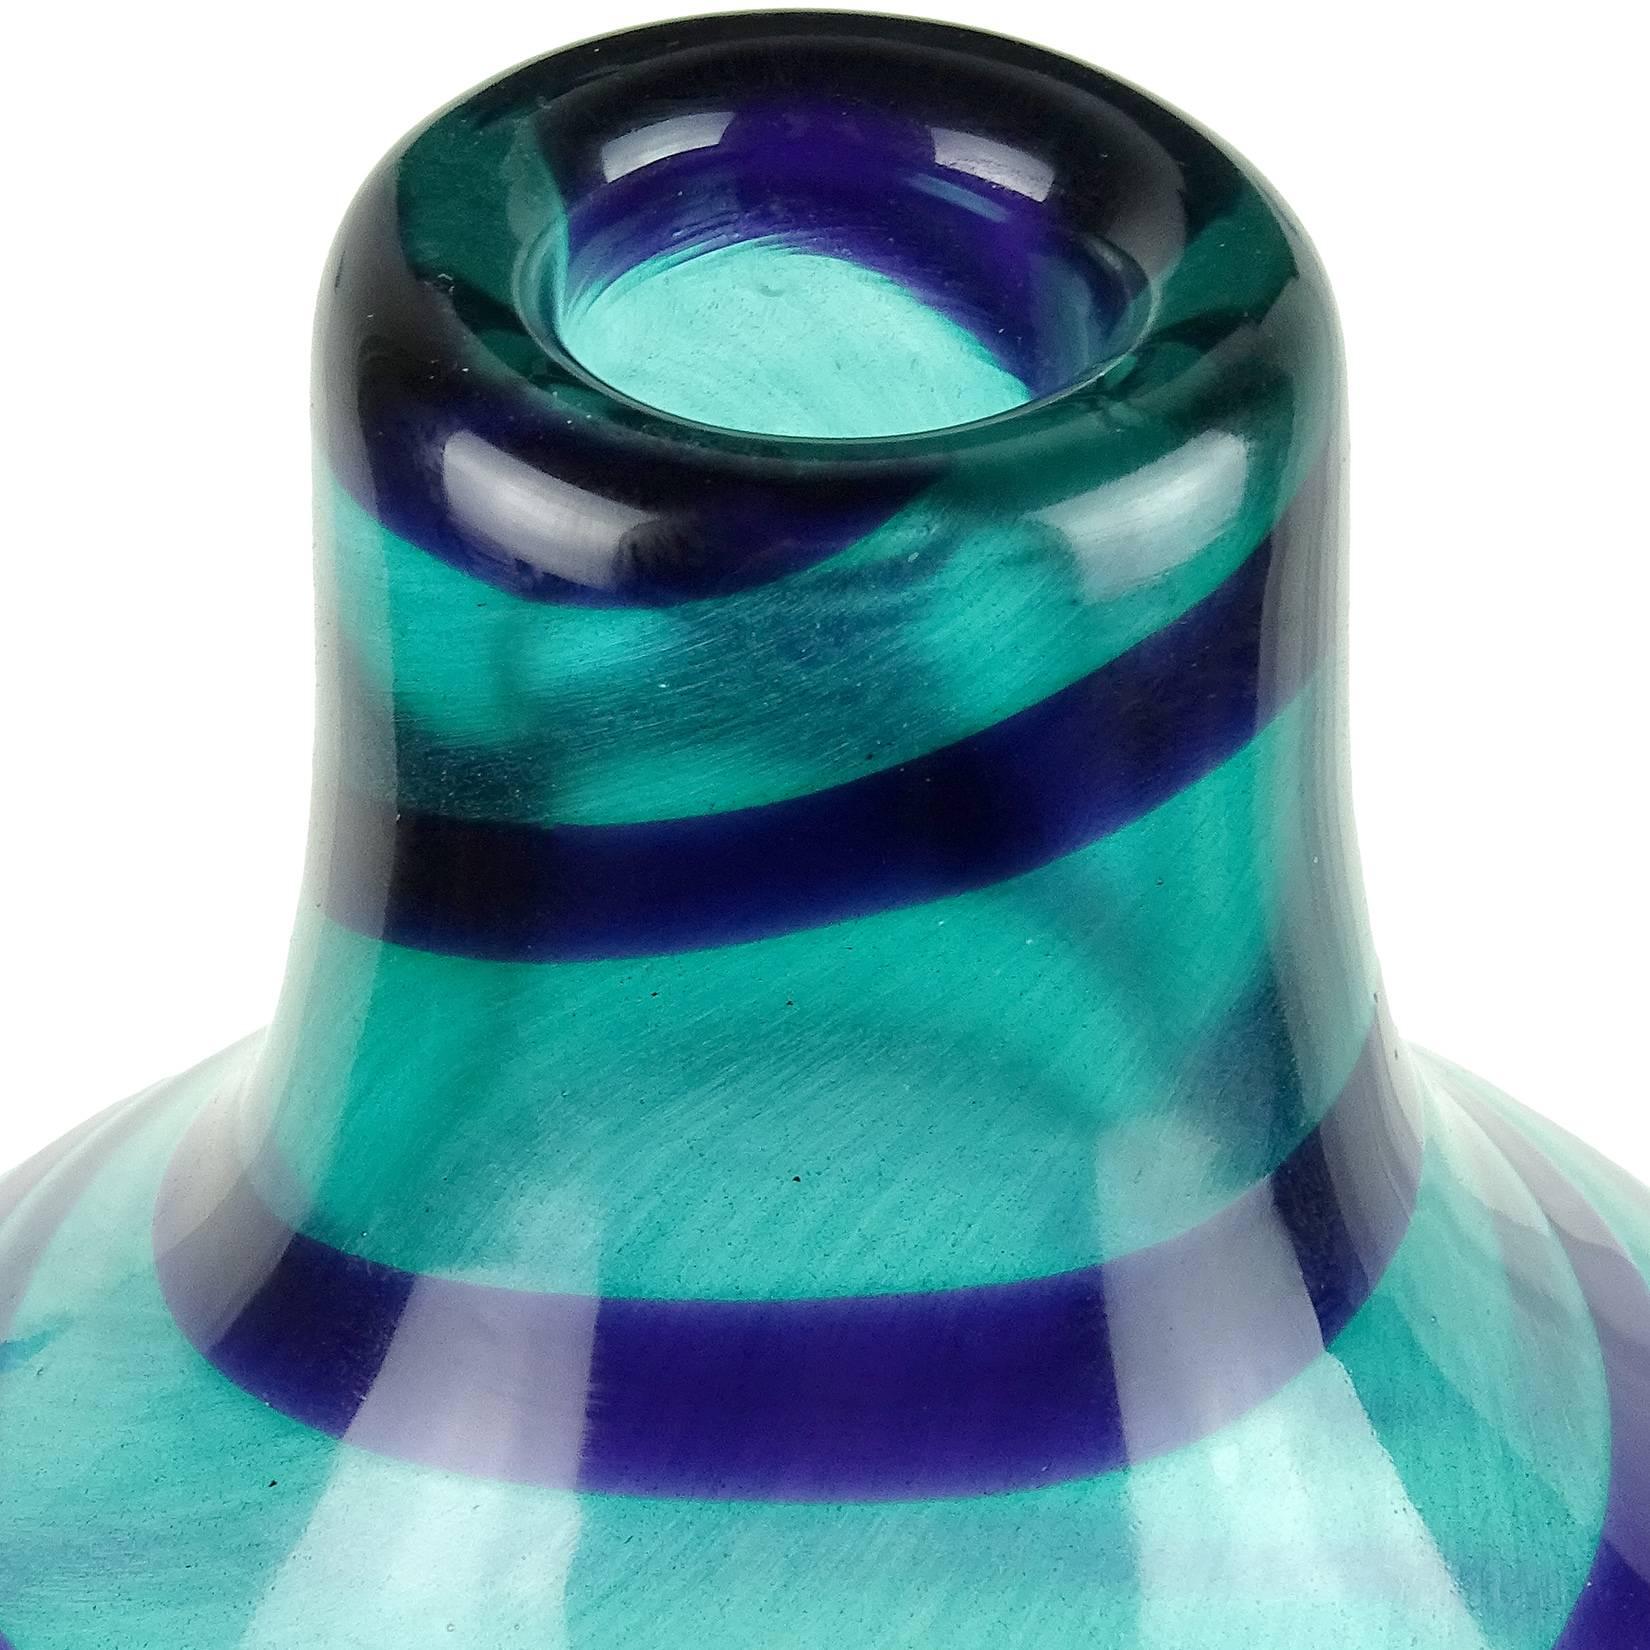 Beautiful Murano handblown aqua blue Italian art glass gurgle vase or bottle. Created in the manner of Venini, with slight surface textured and smooth cobalt blue swirling stripe. Measures 14